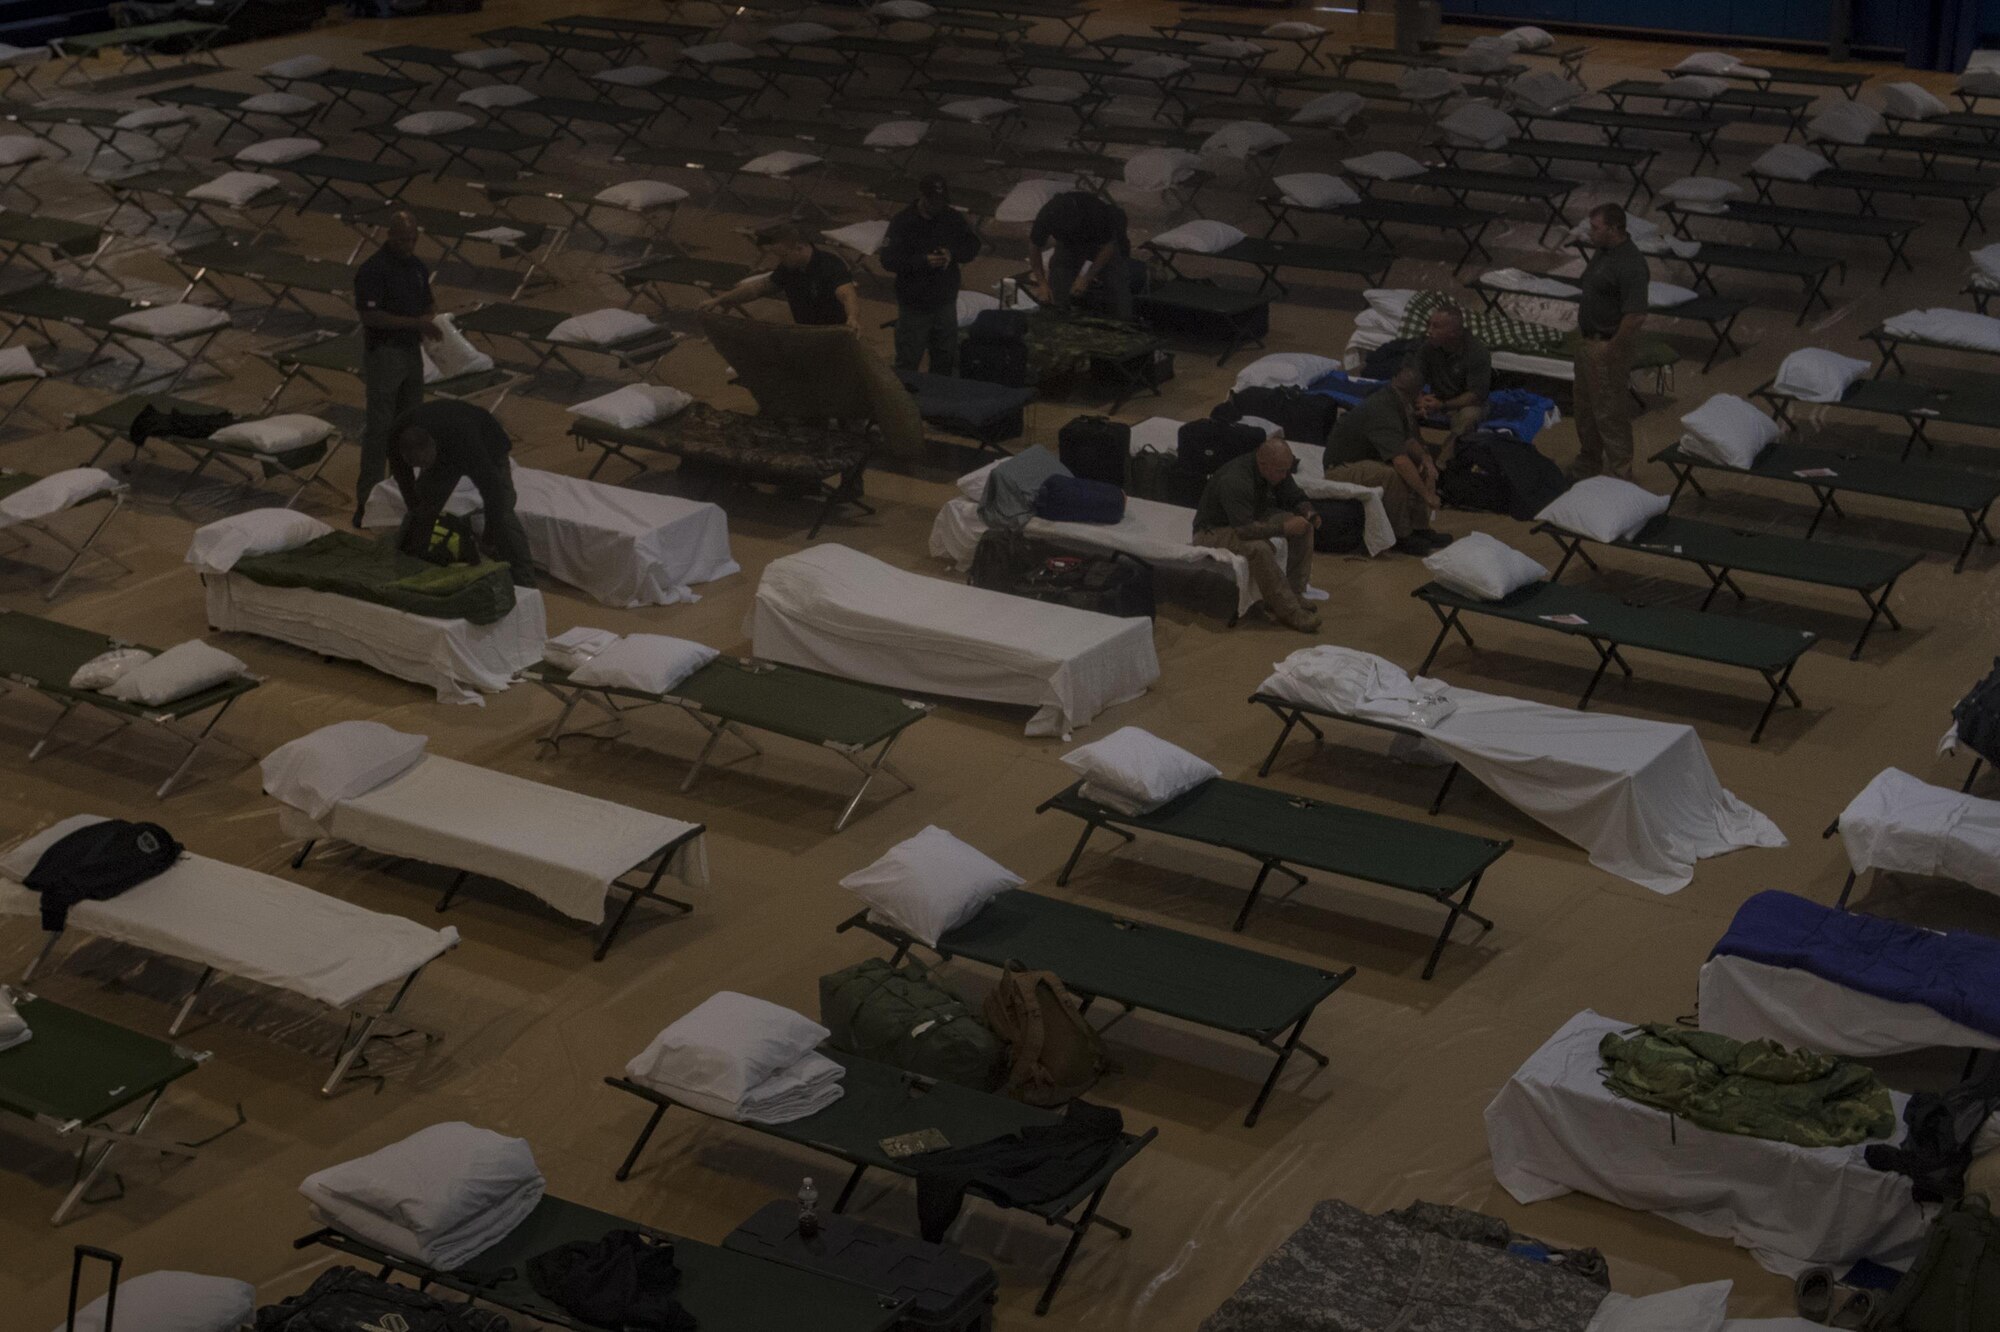 Members from various federal law enforcement agencies rest and relax before deploying to areas affected by Hurricane Irma, Sept. 10, 2017, at Moody Air Force Base, Ga. Moody Air Force Base hosted approximately 400 members from 14 different federal agencies who will deploy to conduct security or search and rescue missions in areas effected by Hurricane Irma. (U.S. Air Force photo by Airman 1st Class Daniel Snider)